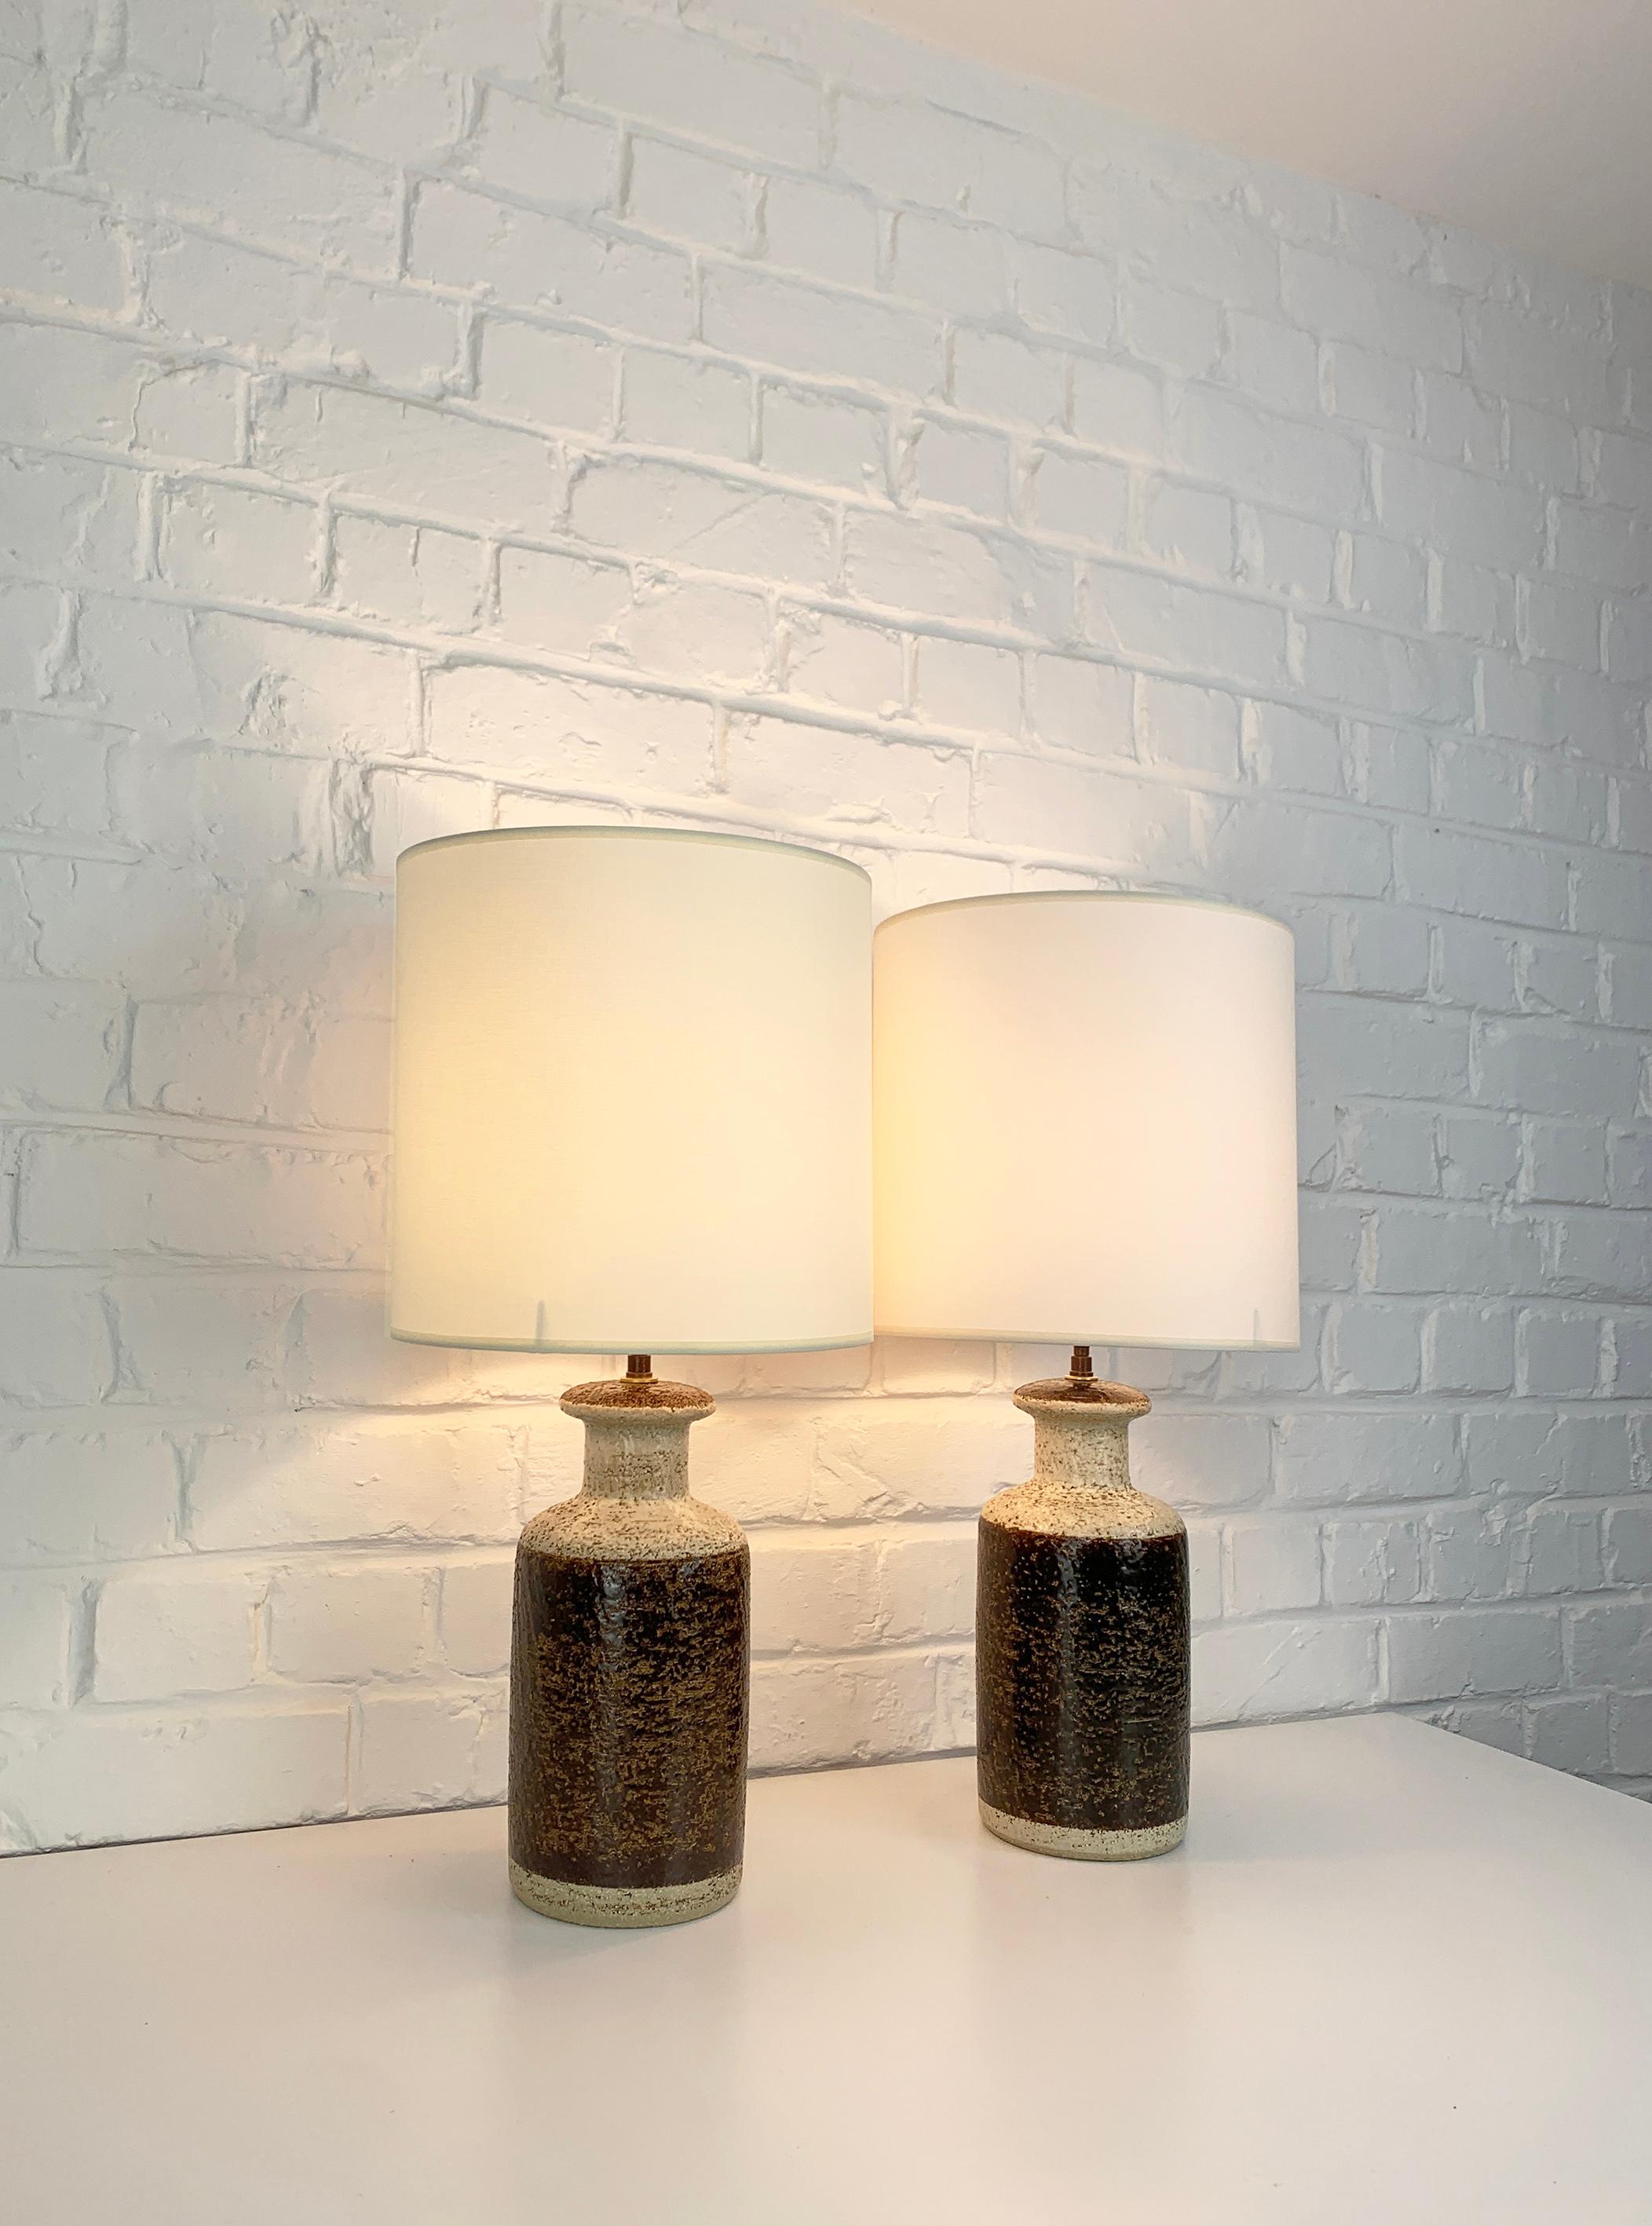 Pair of Danish Mid-Century stoneware table lamps of the 1970s, design by Svend Aage Jensen. 

Scuptural lamp bases made of chamotte clay with earth-tone glaze, chocolate brown and beige colors. These lamps exist in three different sizes, here the